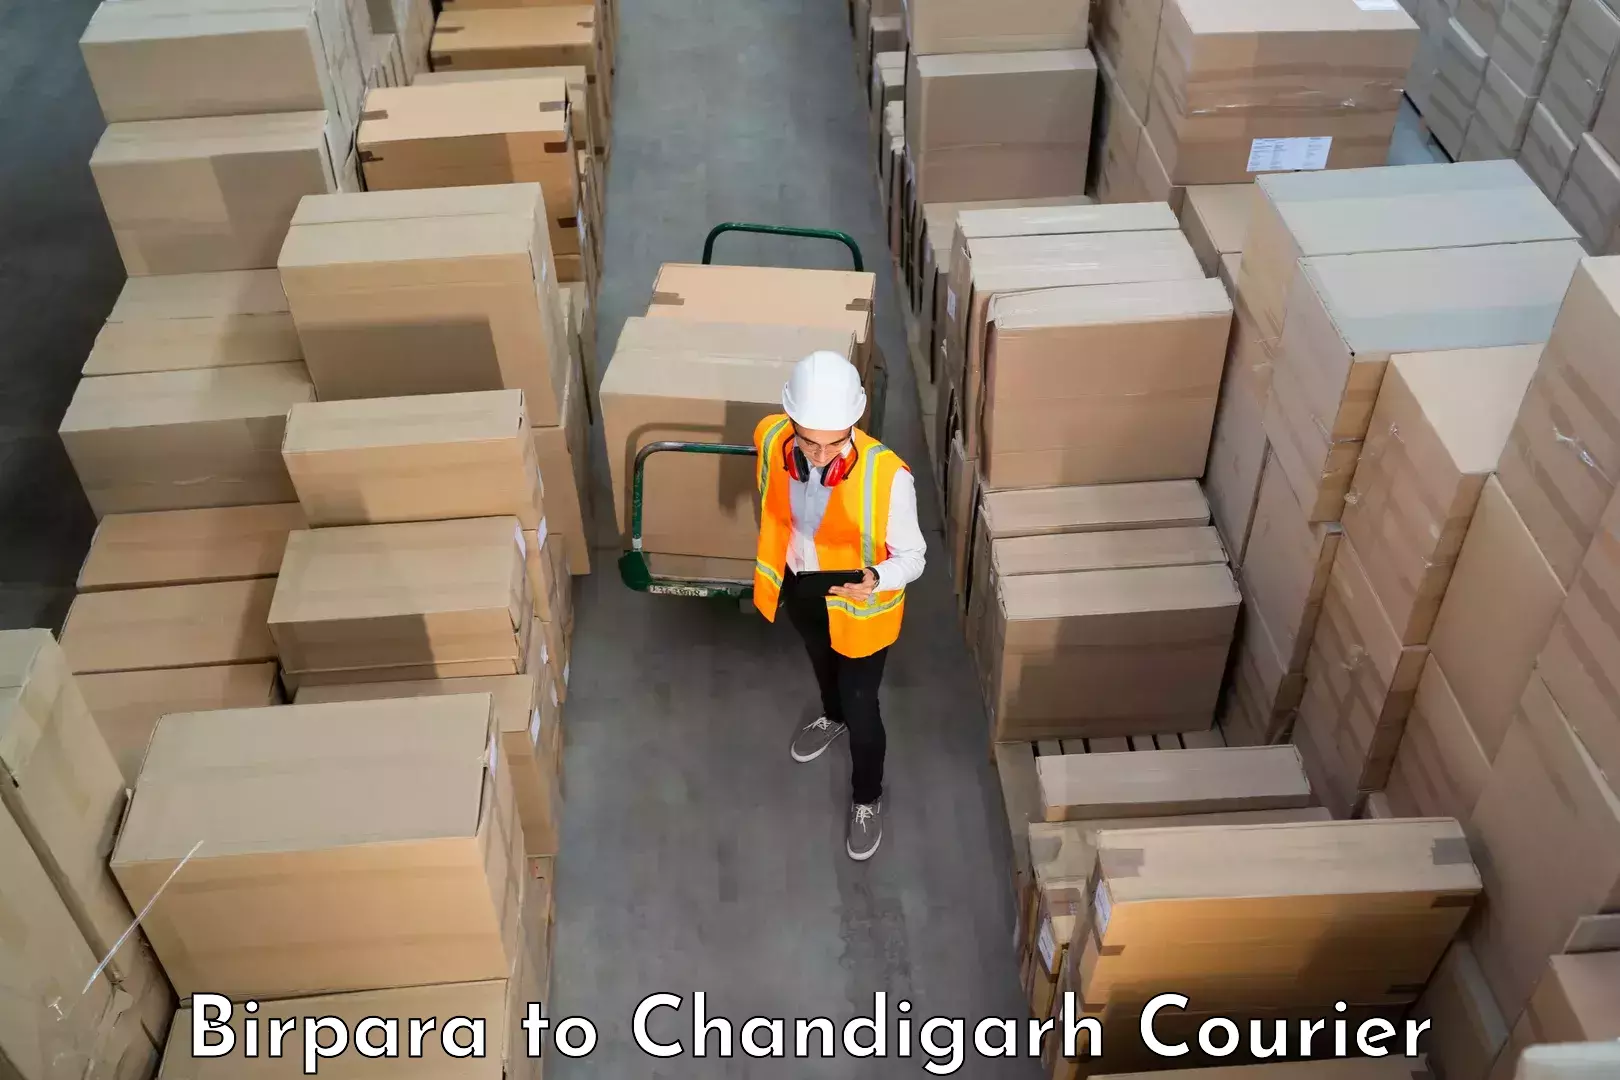 Furniture moving experts Birpara to Chandigarh